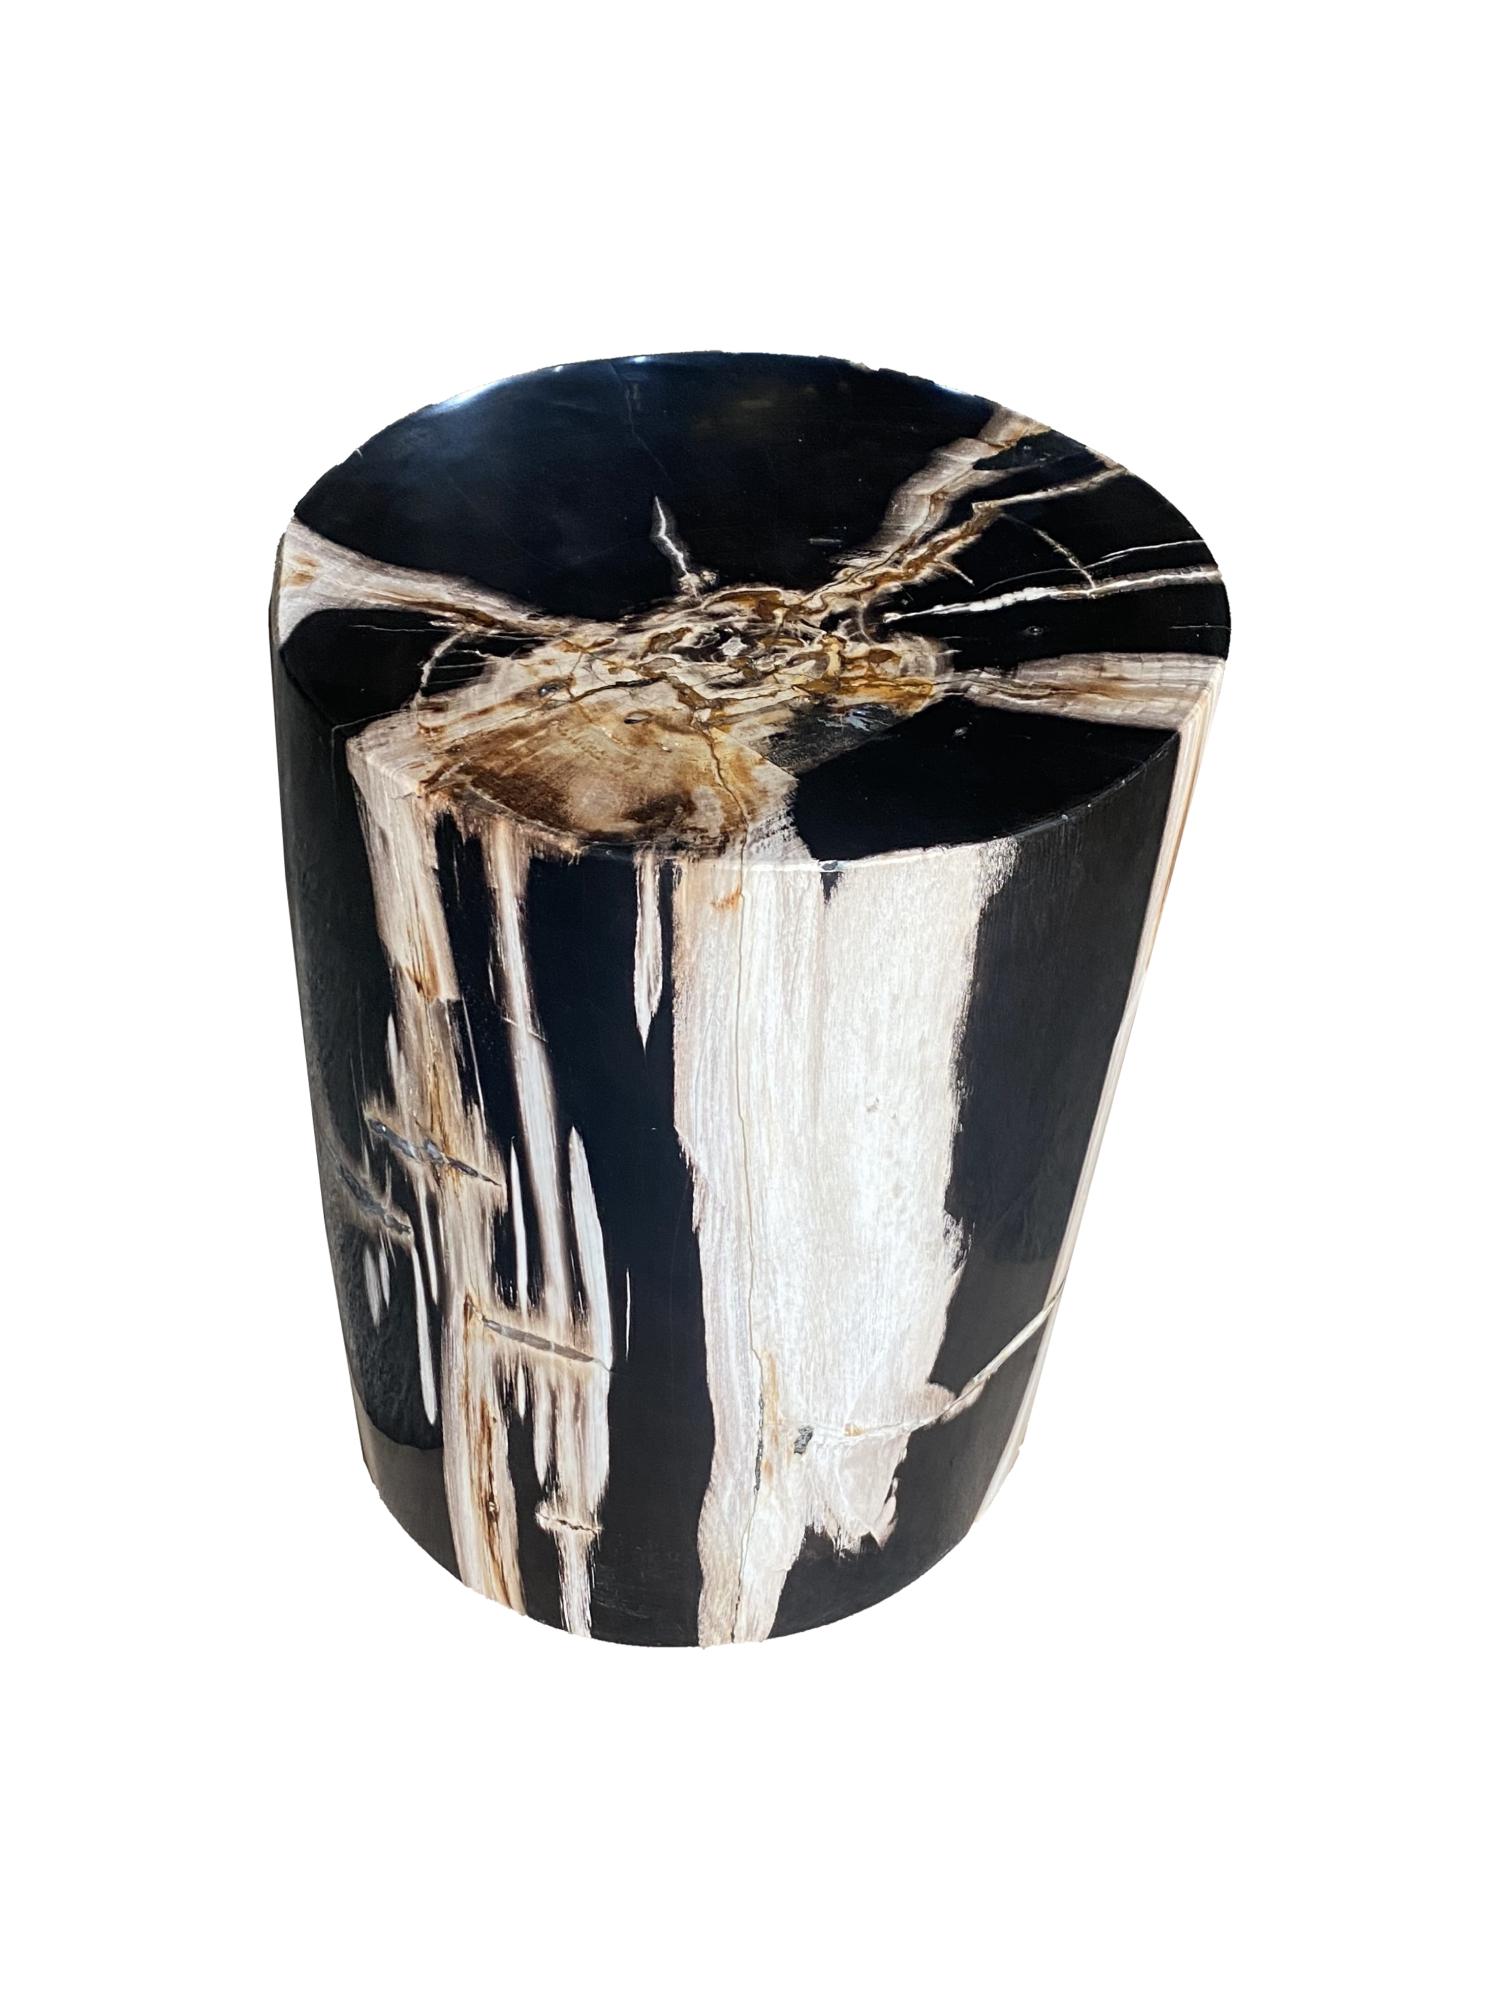 Stool round wood by DeepWood
One Of a Kind
Dimensions: L 30 W 30 H 40 cm
Materials: Petrified wood fully polished
Wight: 55 kg

Each DeepWood piece is expertly crafted from a rarefied specimen of petrified wood and contains 25 million+ years